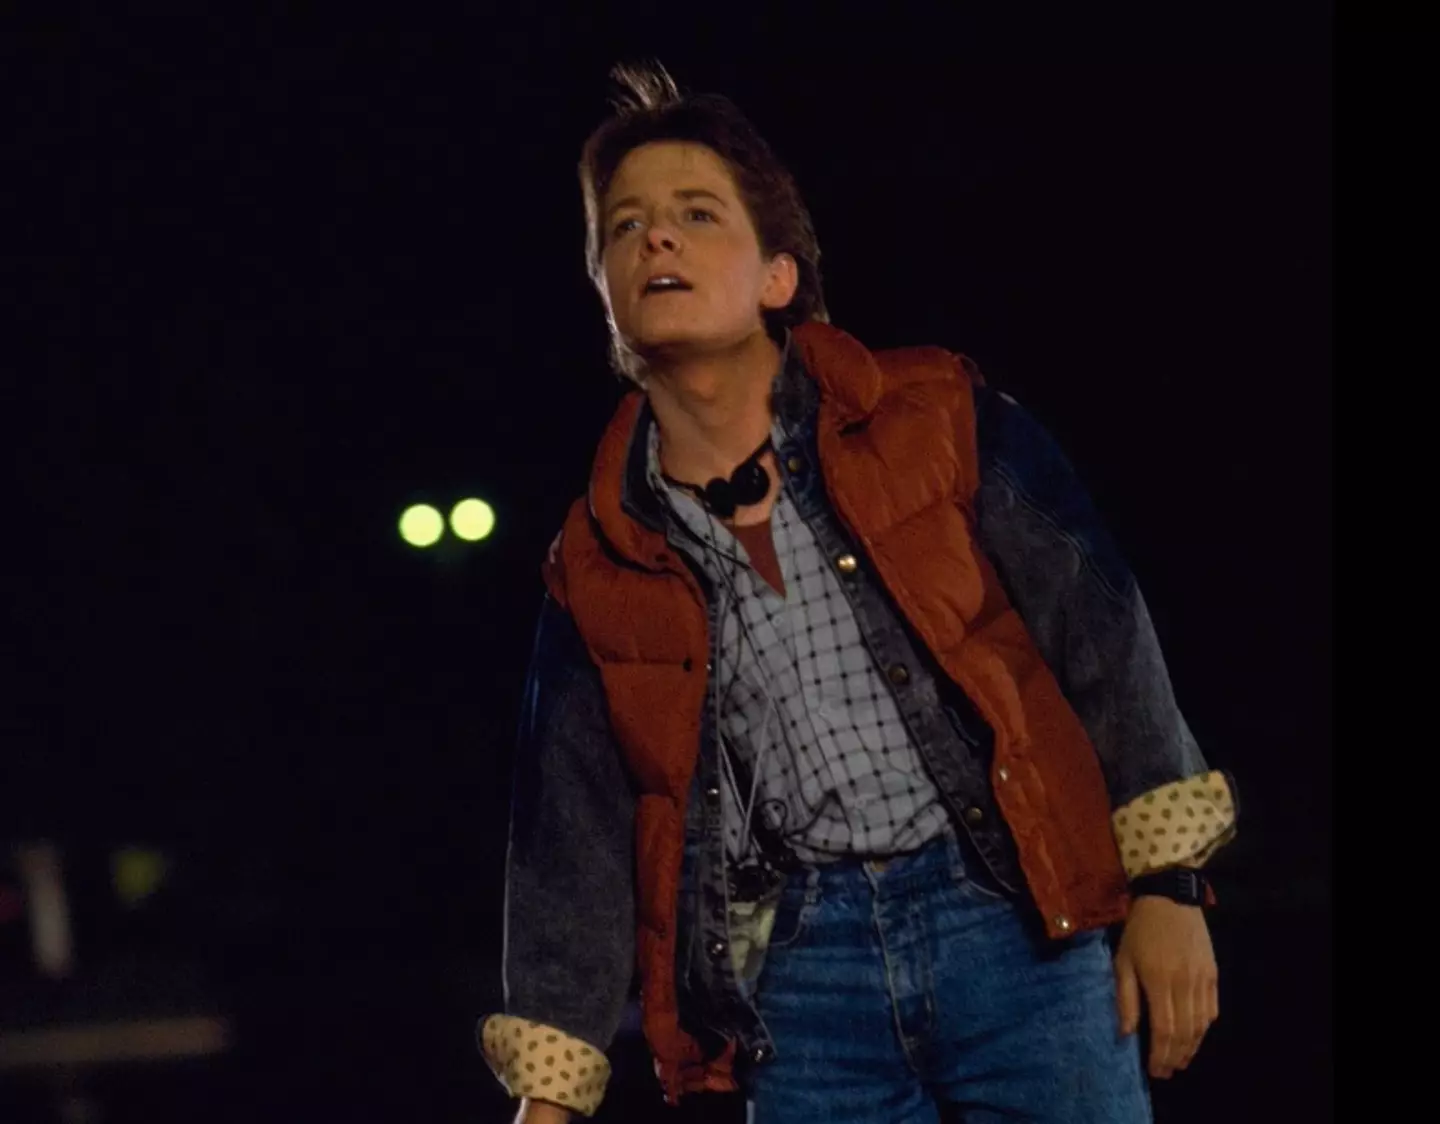 Michael J Fox rose to fame in the late 70s and 80s.